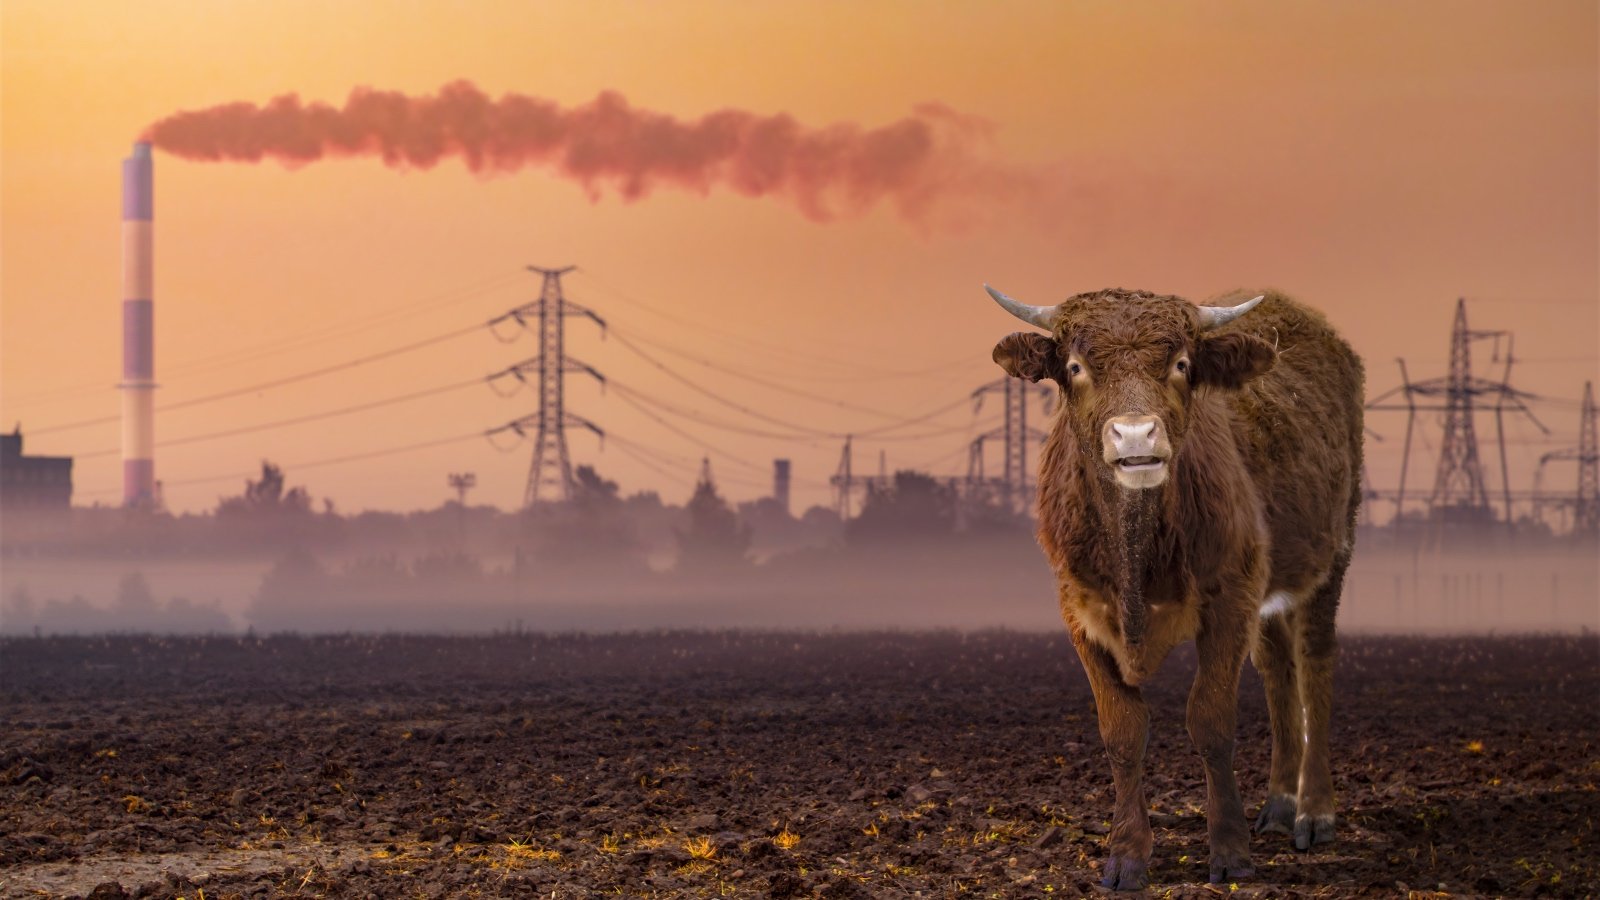 Animal Agriculture Responsible For Thousands of Air-Quality Related Deaths, Says Study